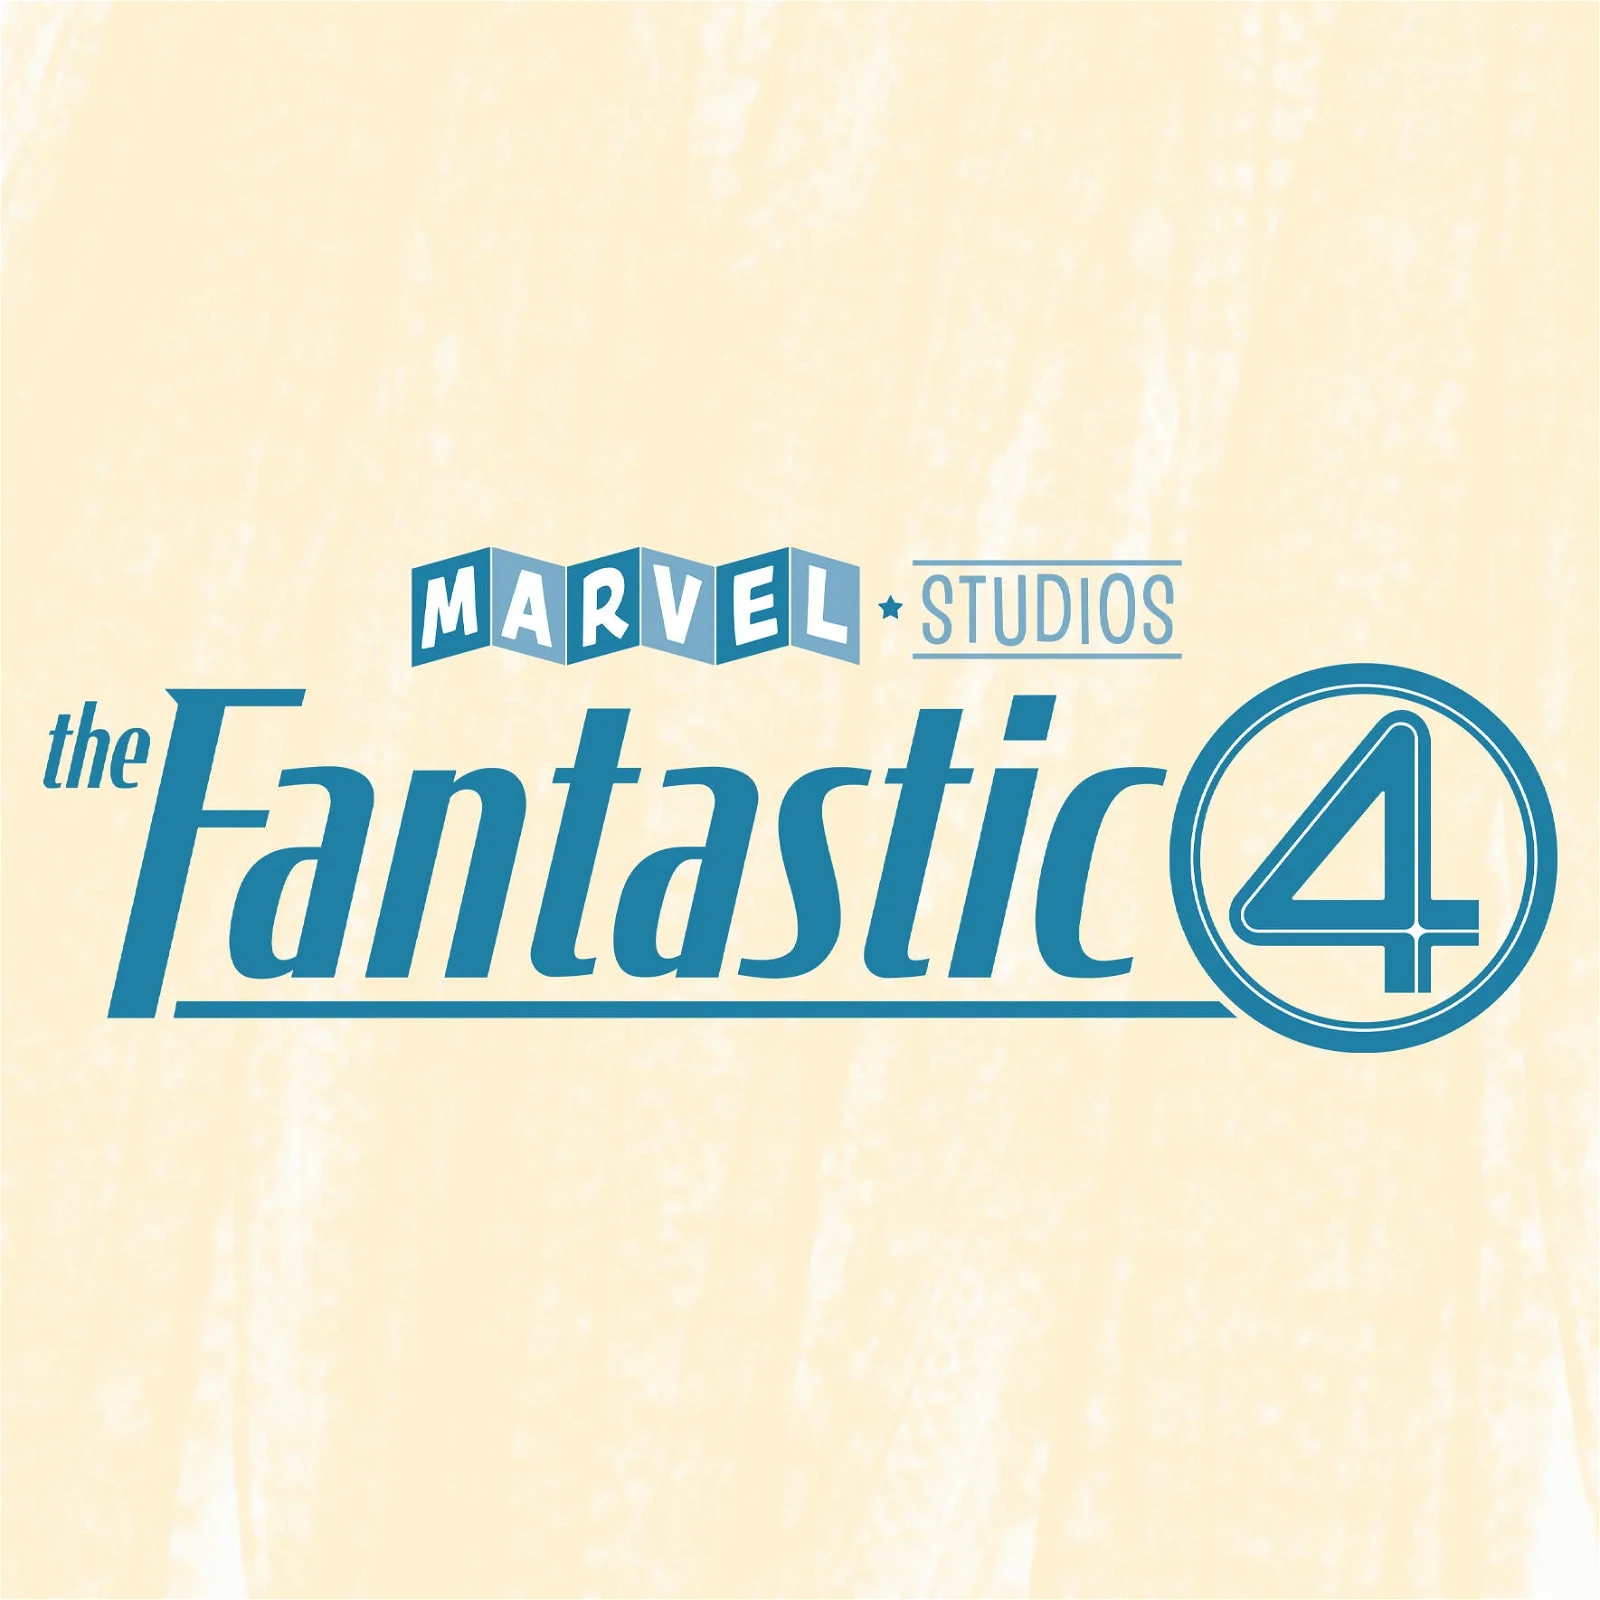 The logo of the upcoming Fantastic Four